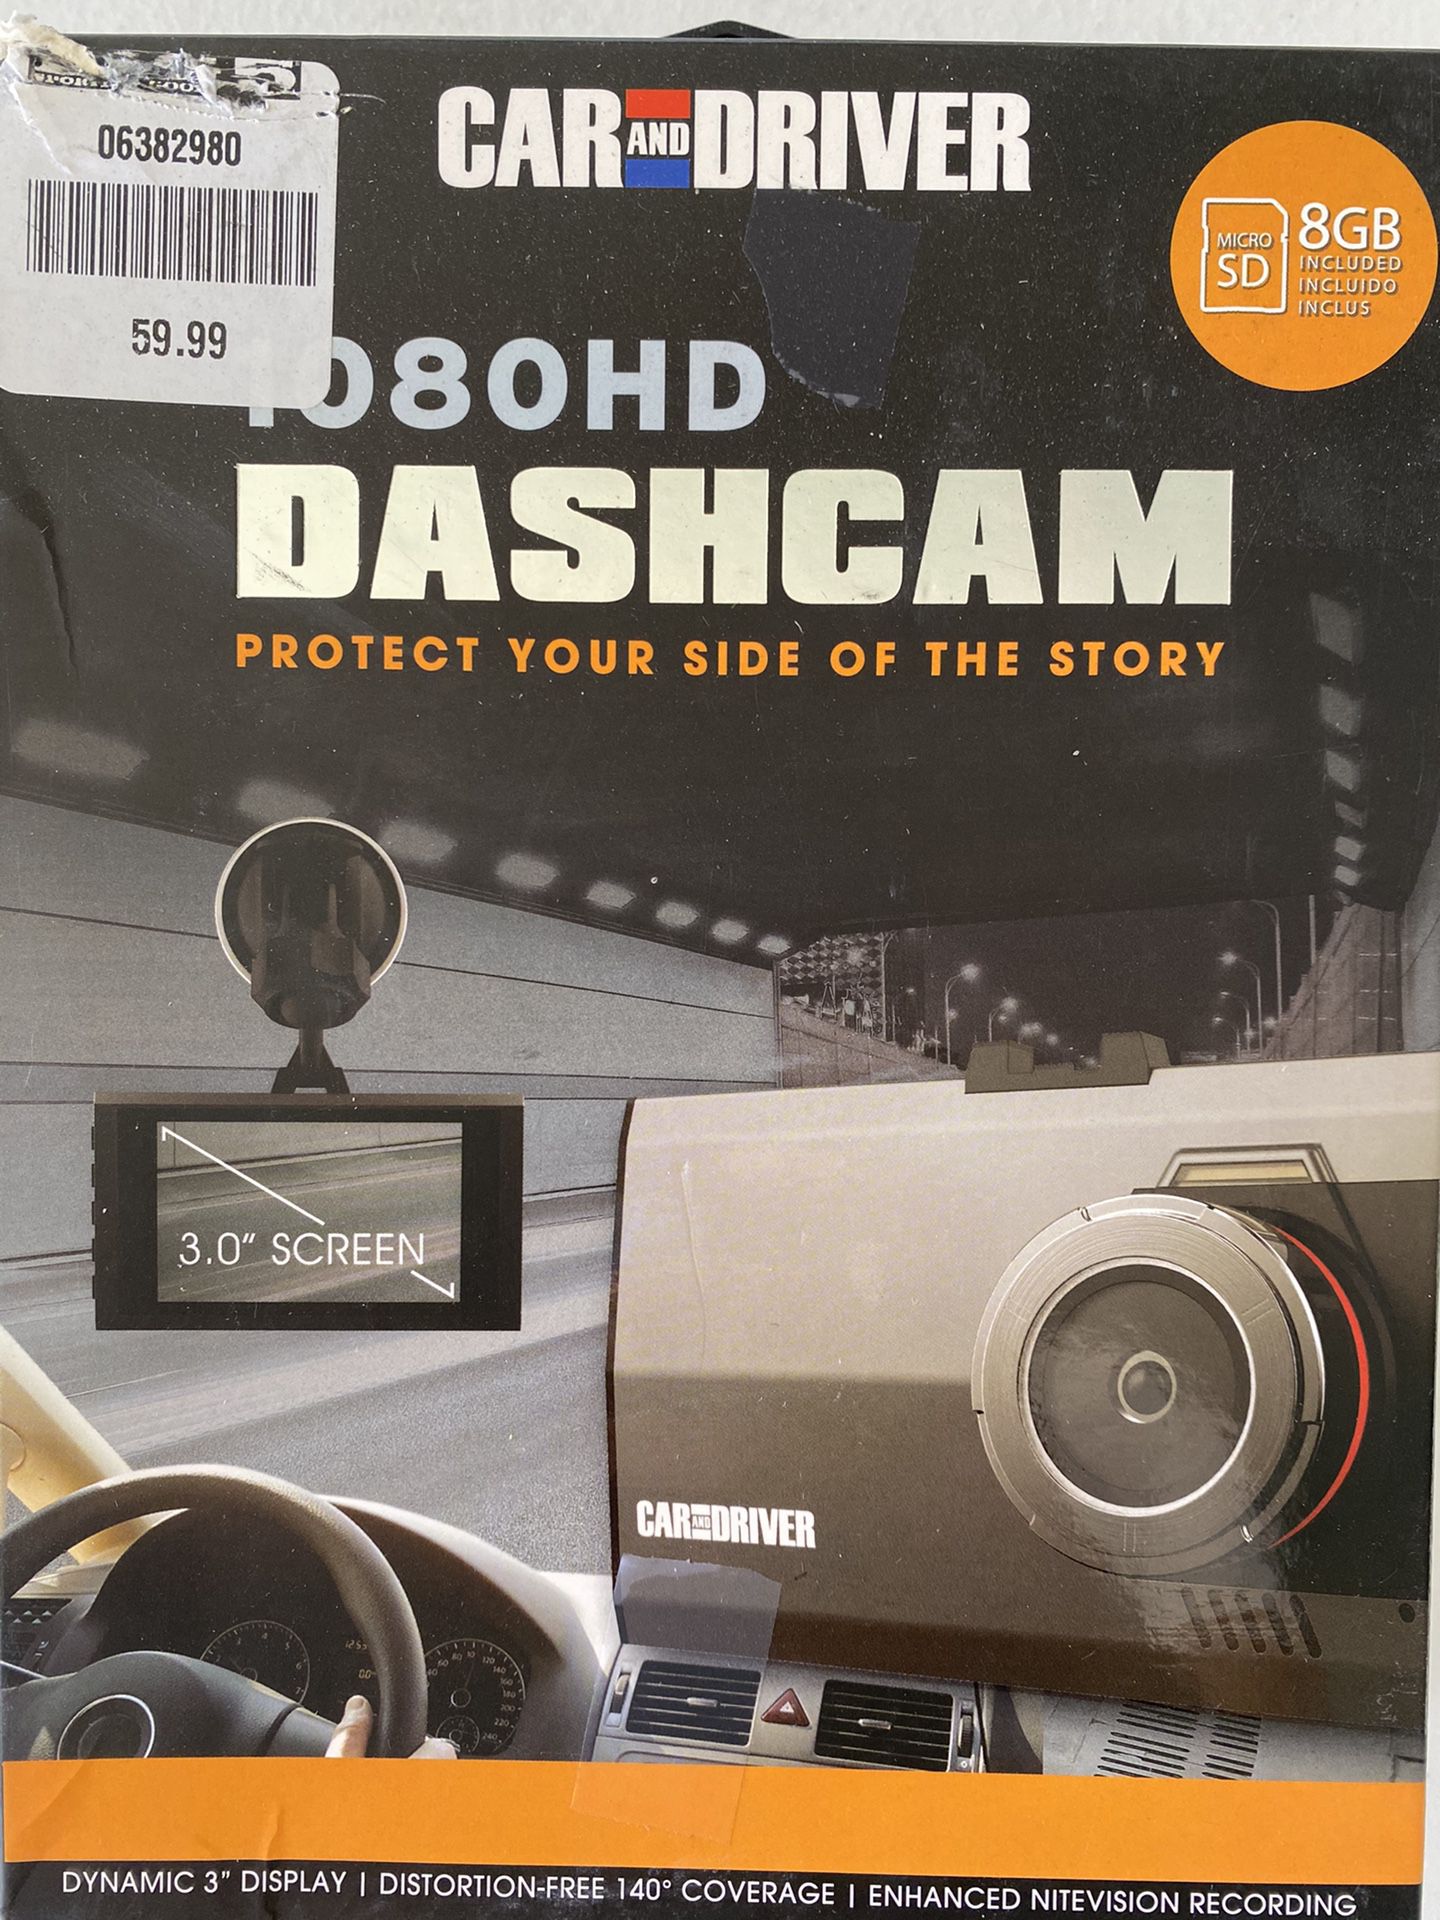 New dash cam old model/ buy one get one free